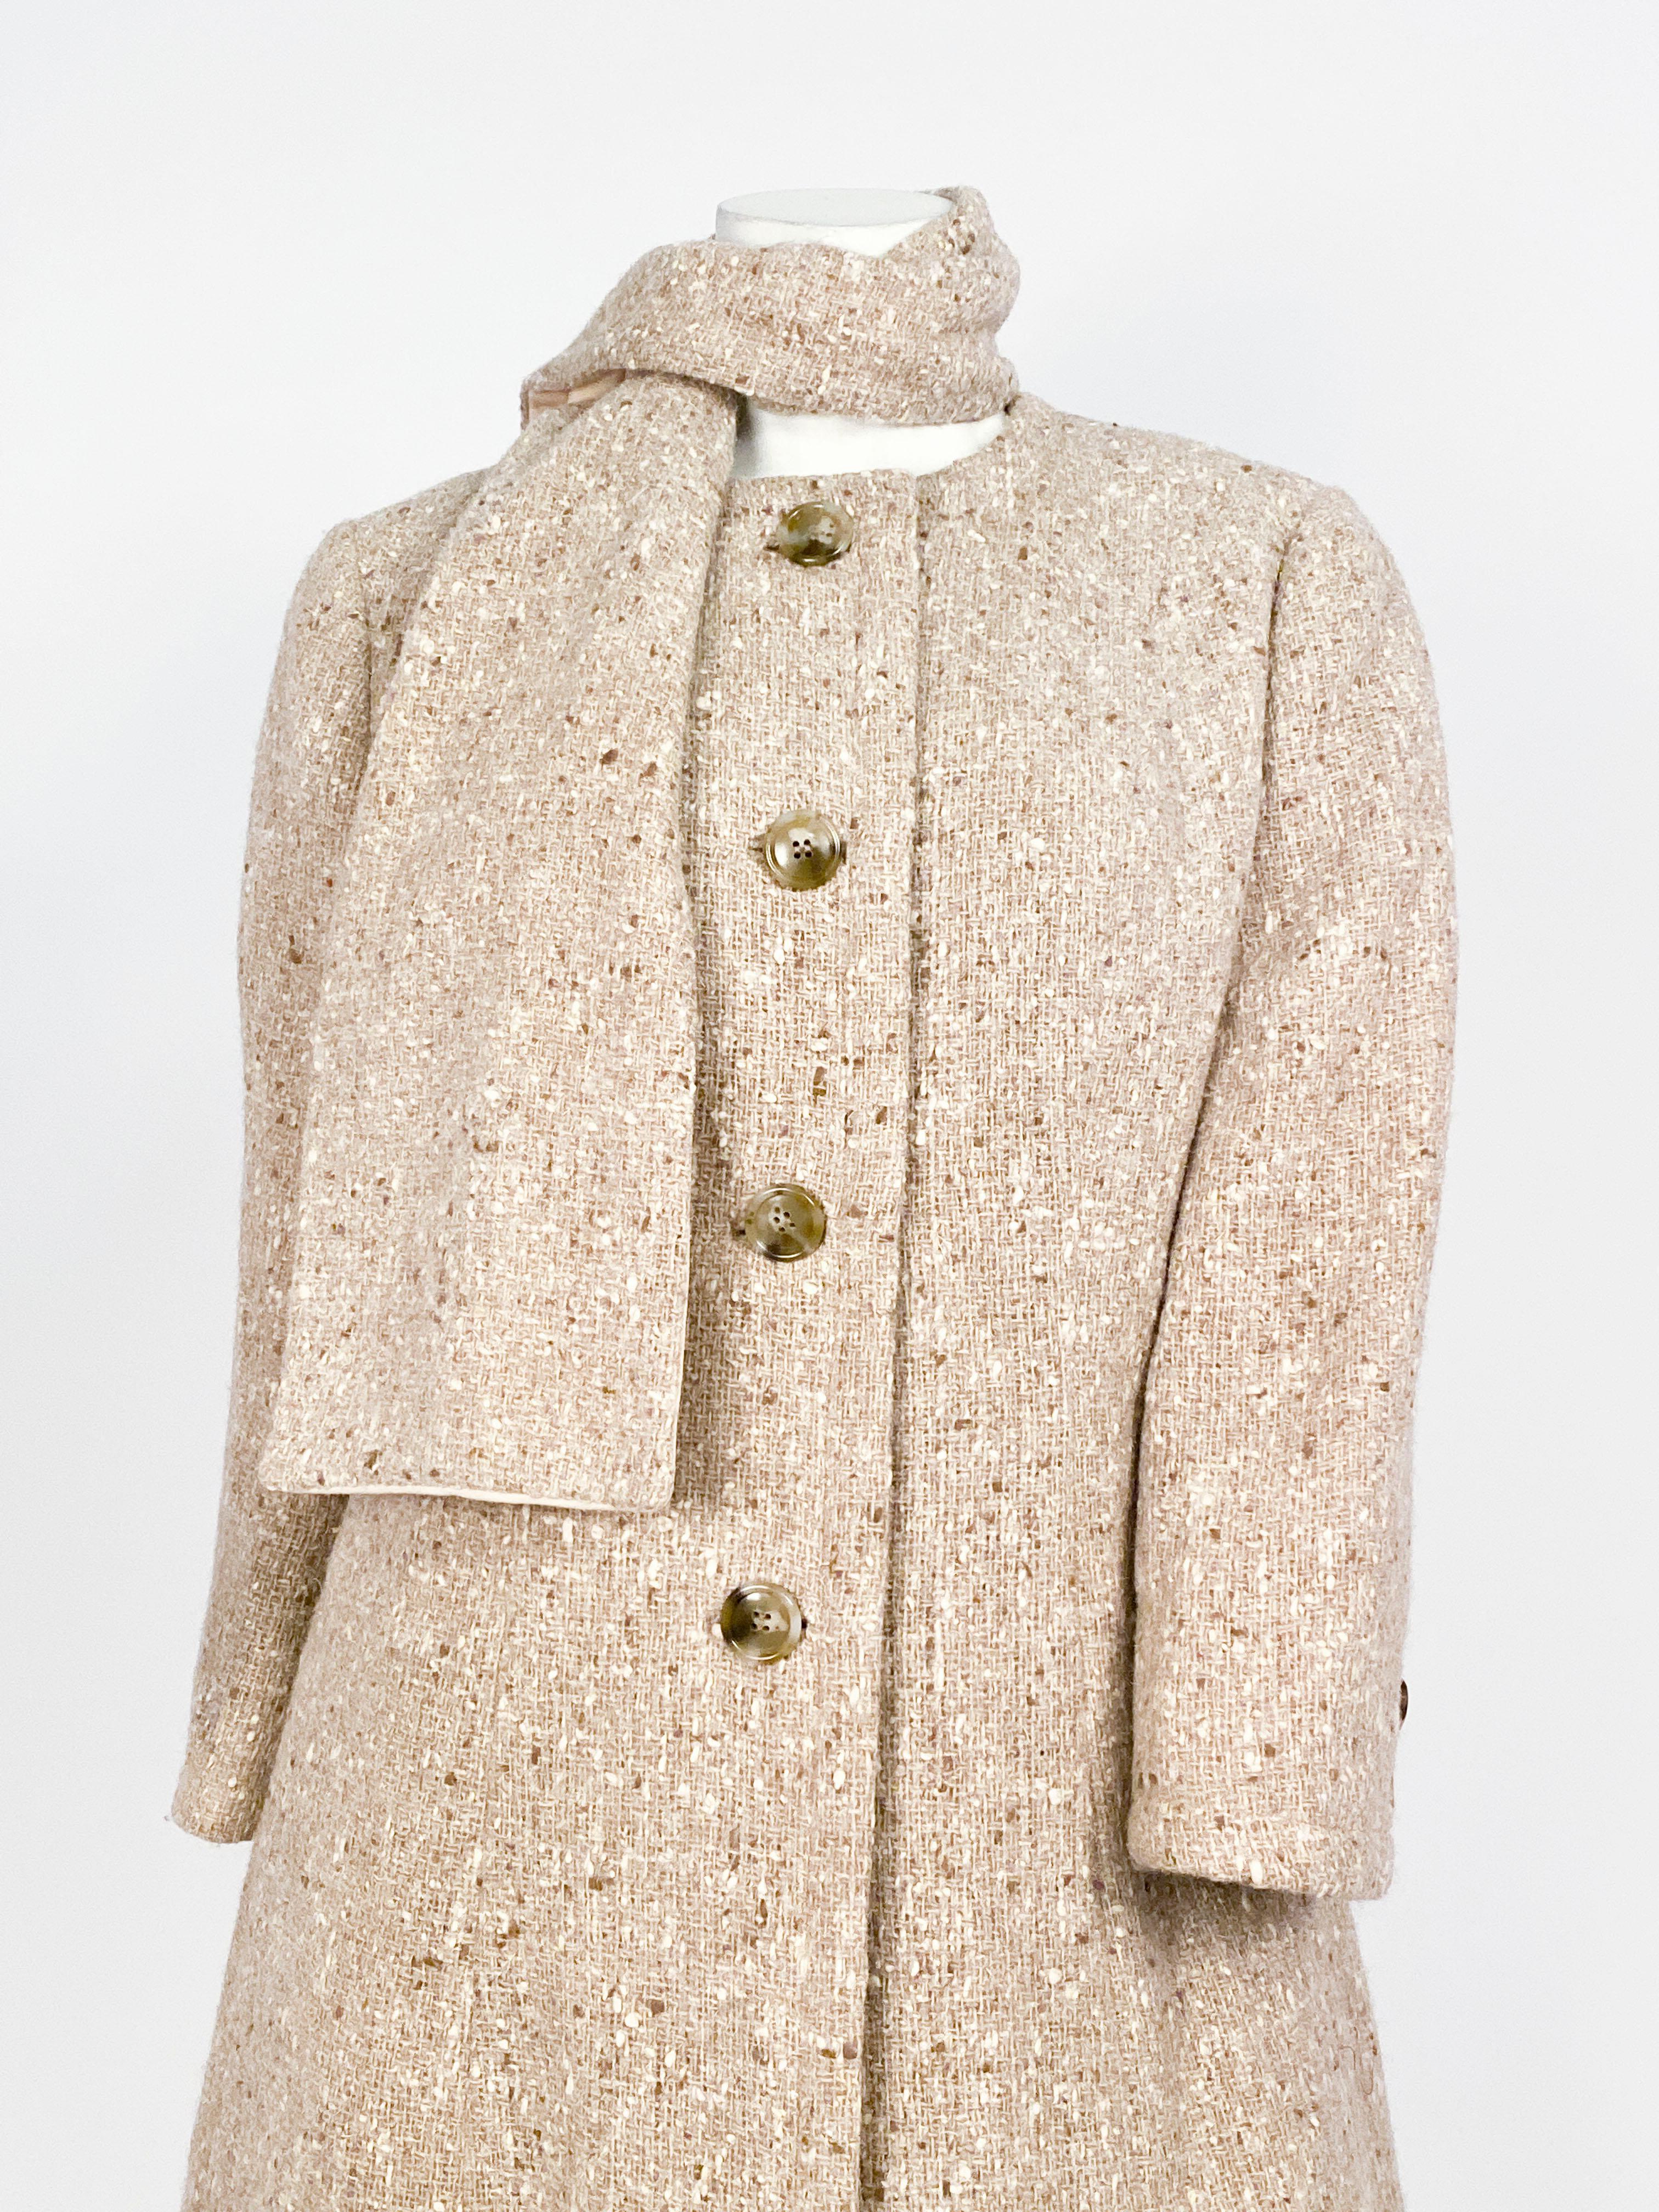 1960s Jean Louis three-piece suit (coat, skirt, & scarf) set made of a beige tweed with specks of lighter and darker tones. The coat and the skirt has an A-line silhouette and the suit is finished with a matching neck scarf.  